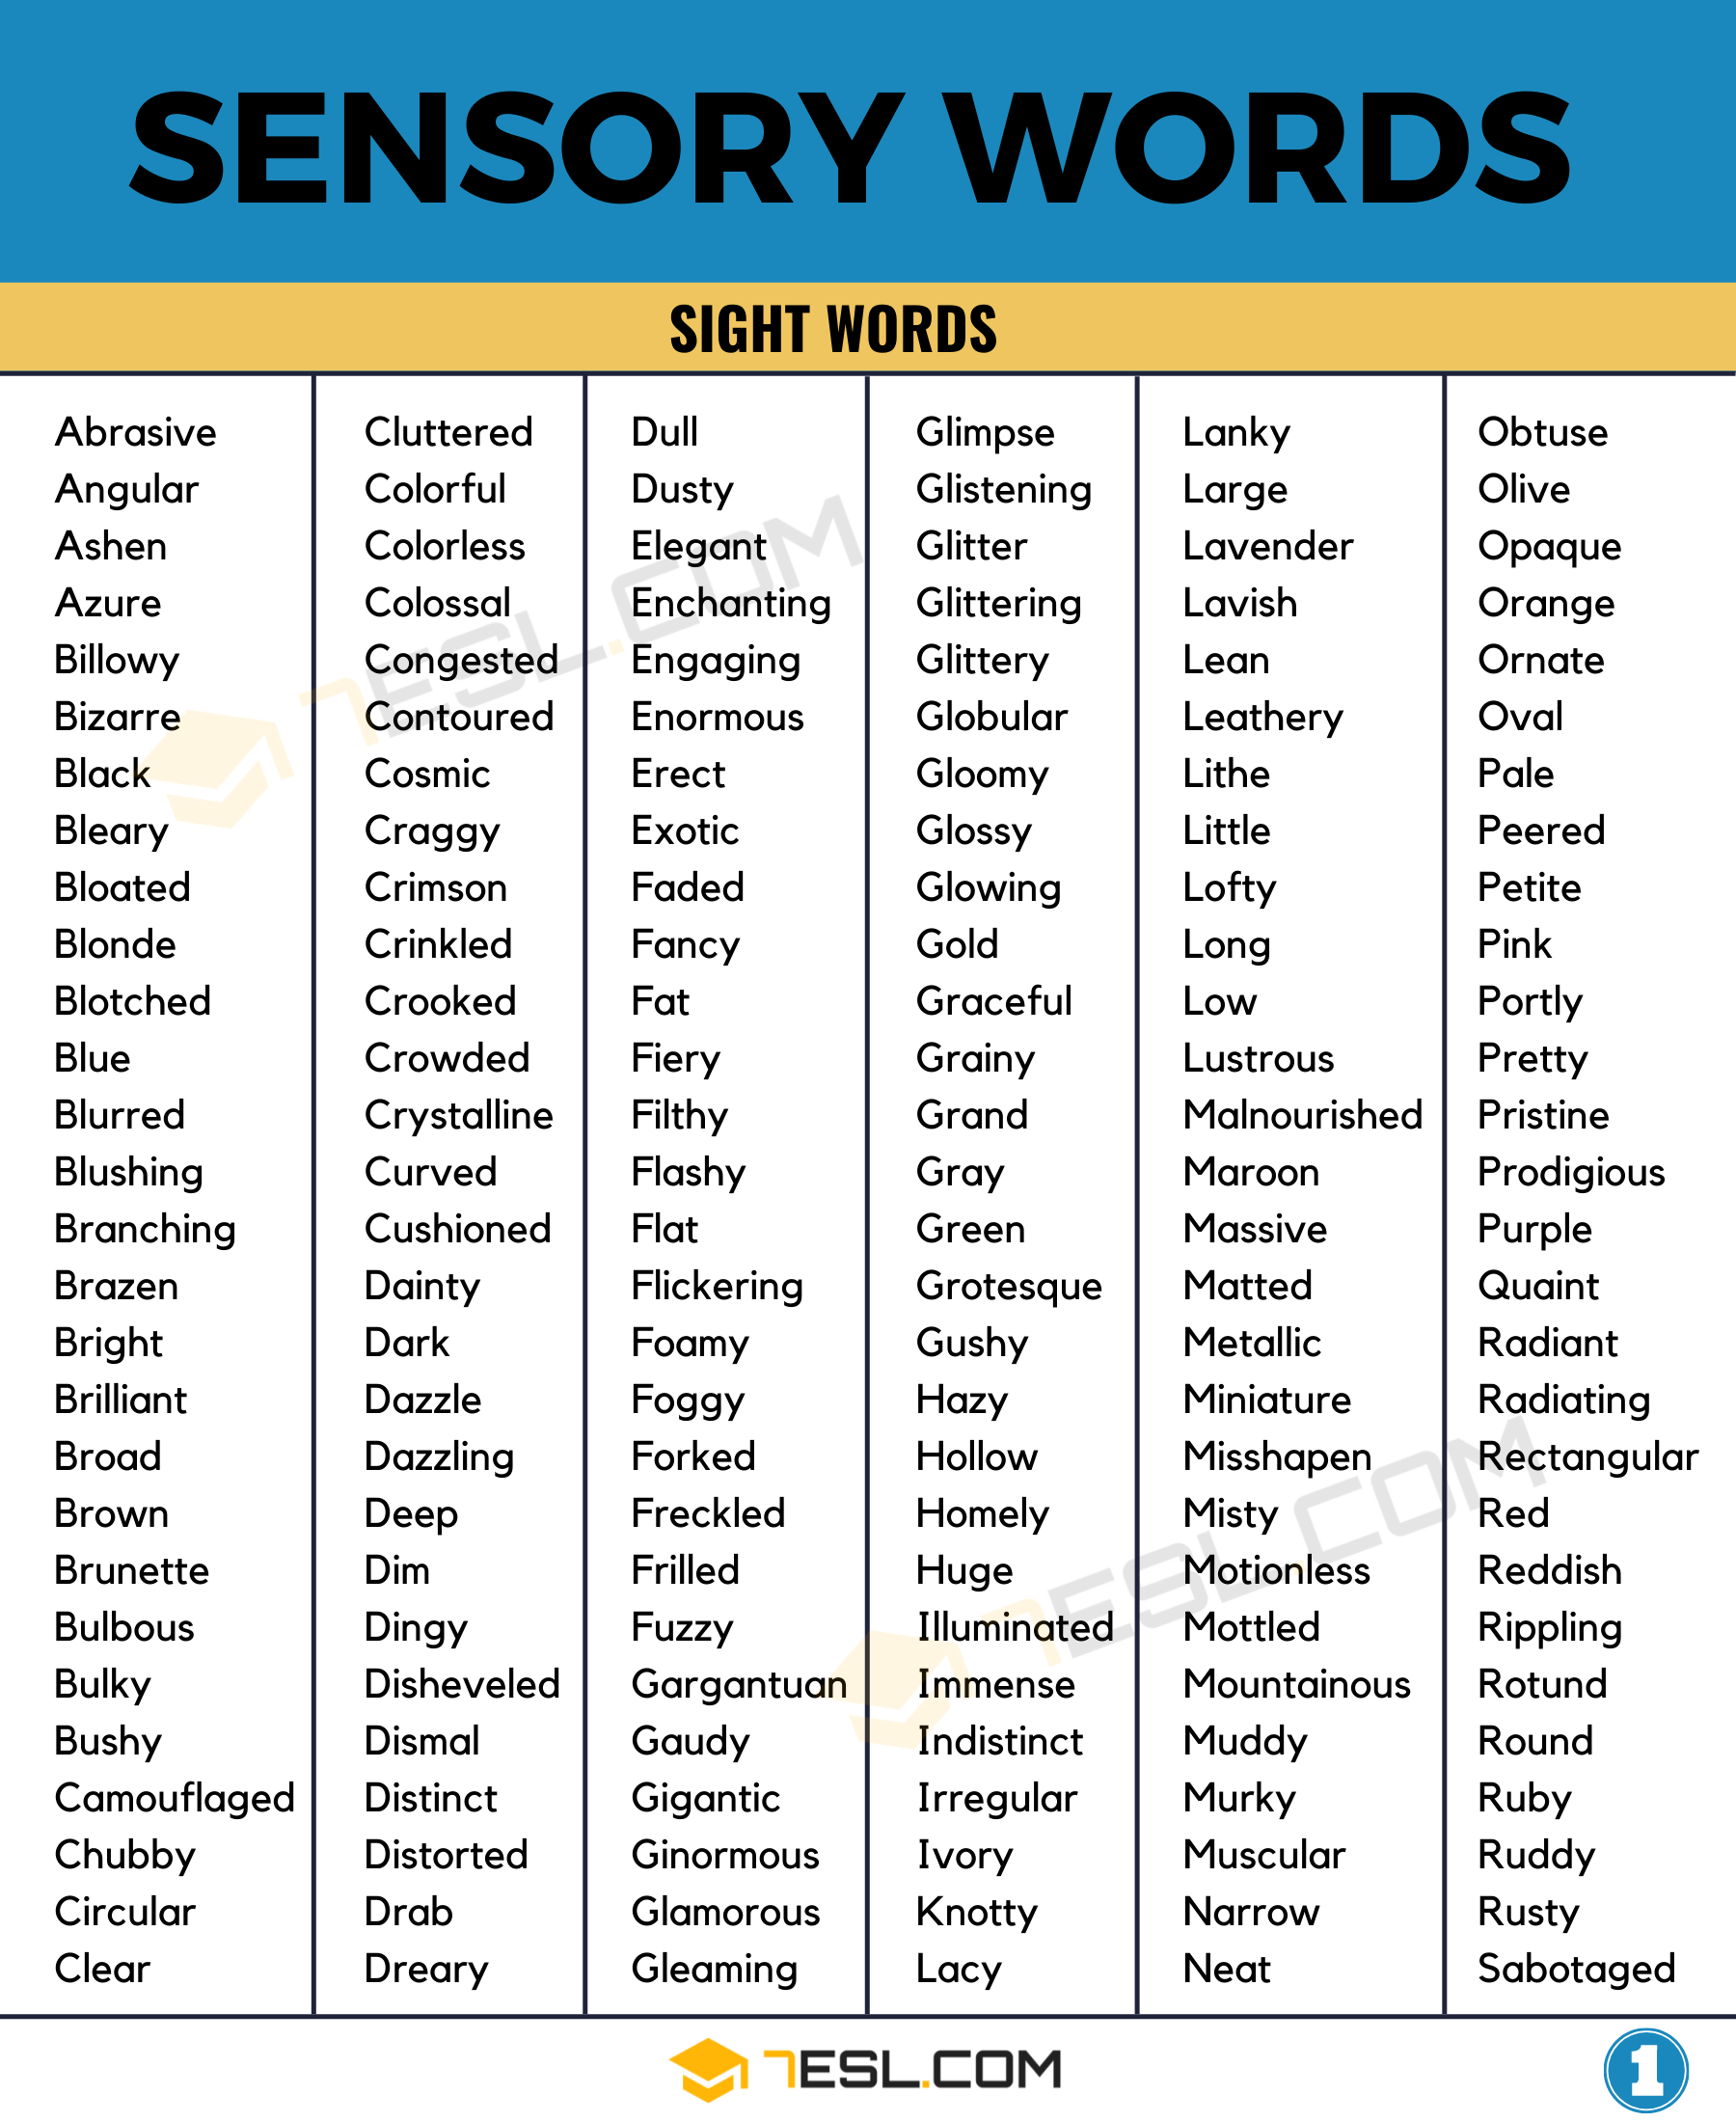 700 Sensory Words To Improve Your Writing In English 7ESL